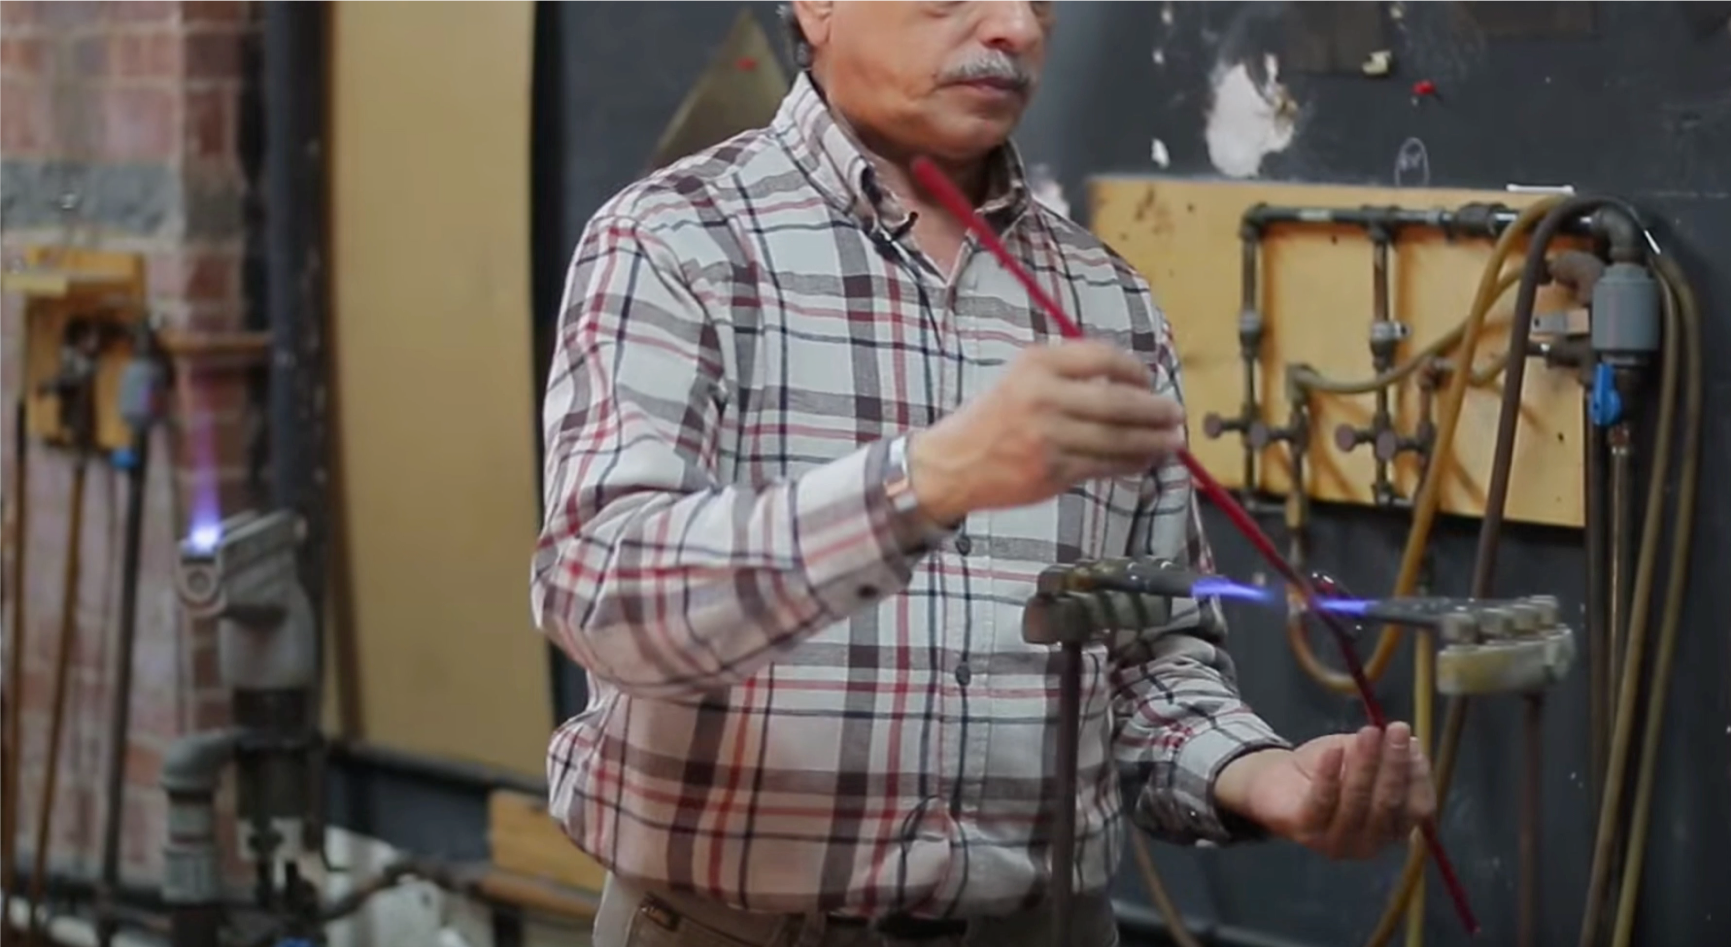  Neon glass fabricator using a torch to bend the glass tube. Video Still: The Past, Present and Future of Neon in New York w/ Let There Be Neon (15:03-15:14)         